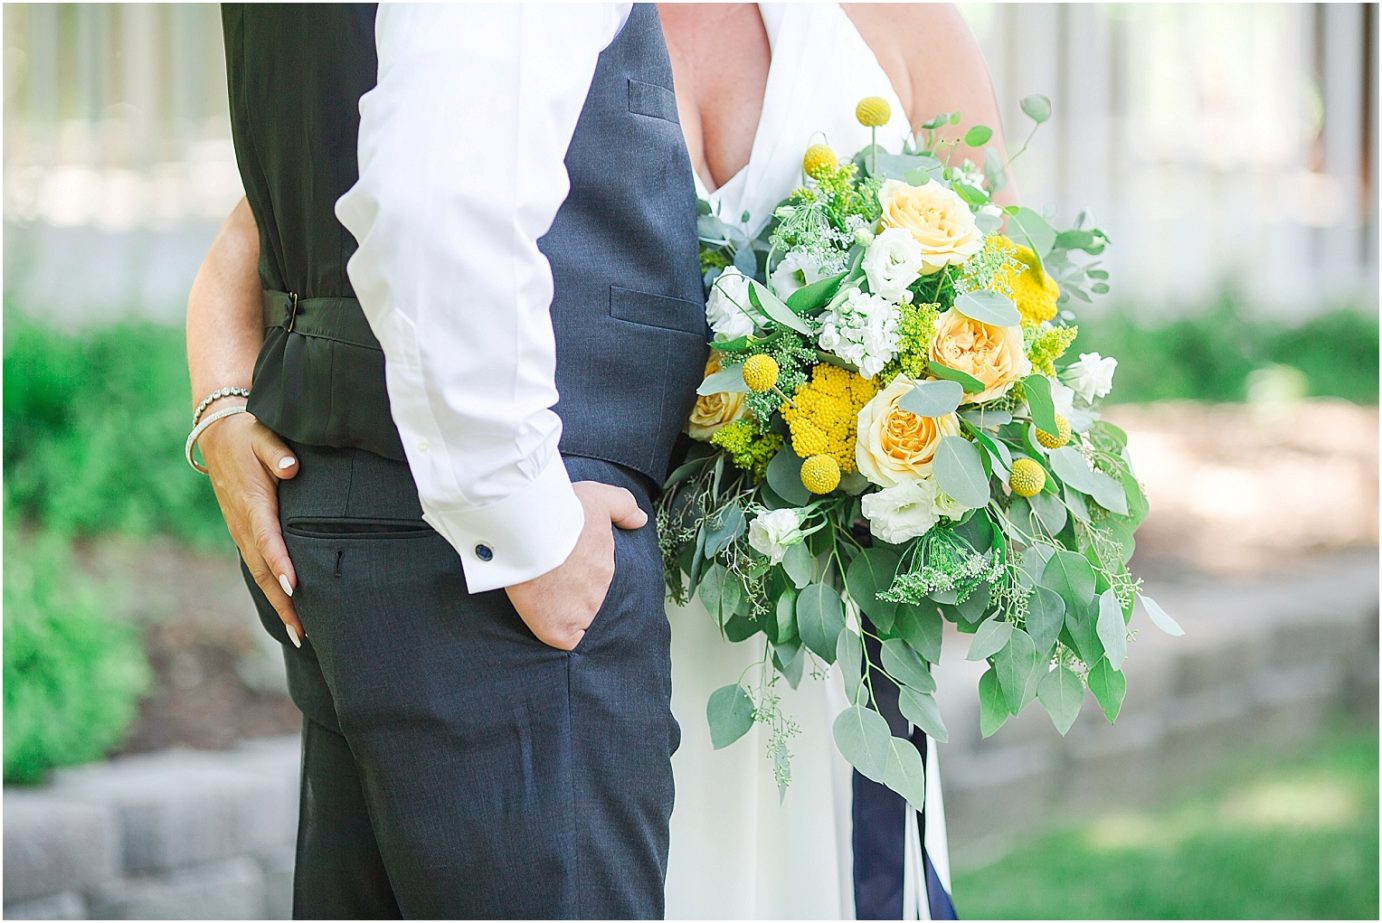 Favorite wedding flowers of 2017 For brides yellow and navy wedding flowers